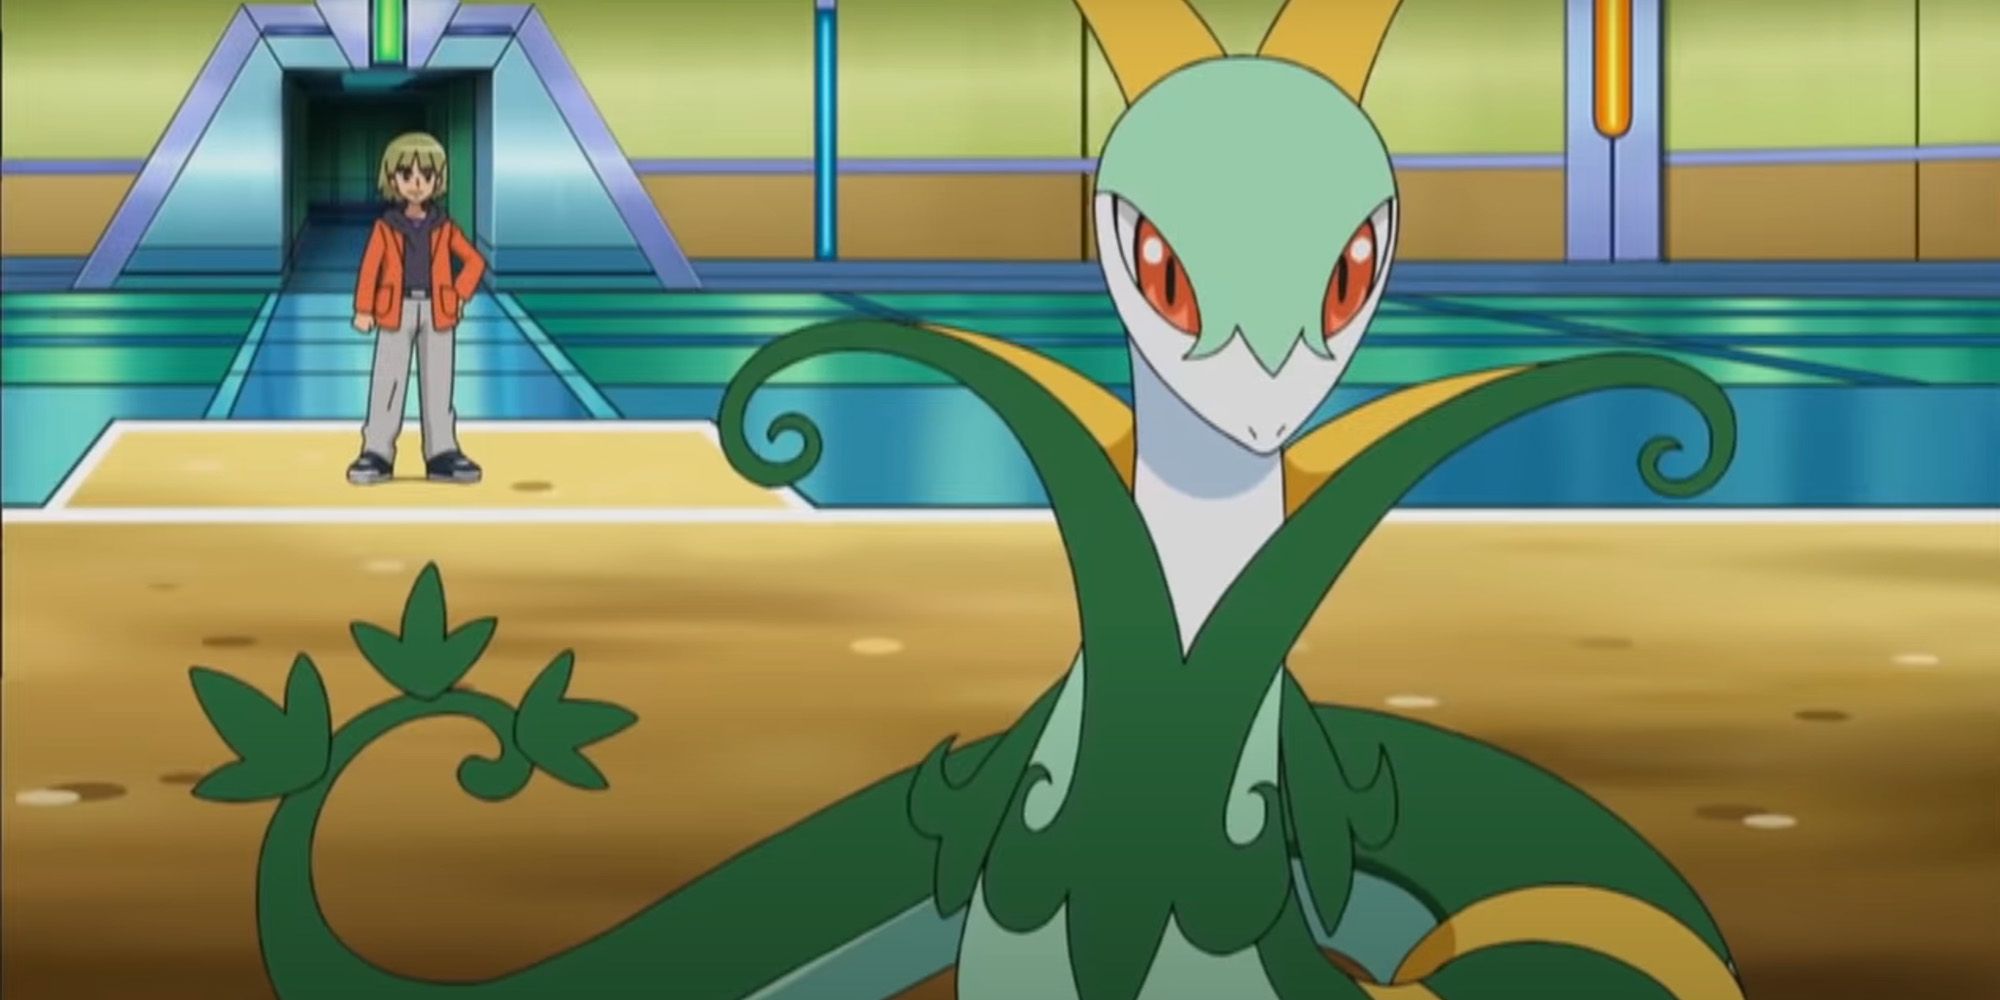 Pokemon - Serperior taking orders from his trainer